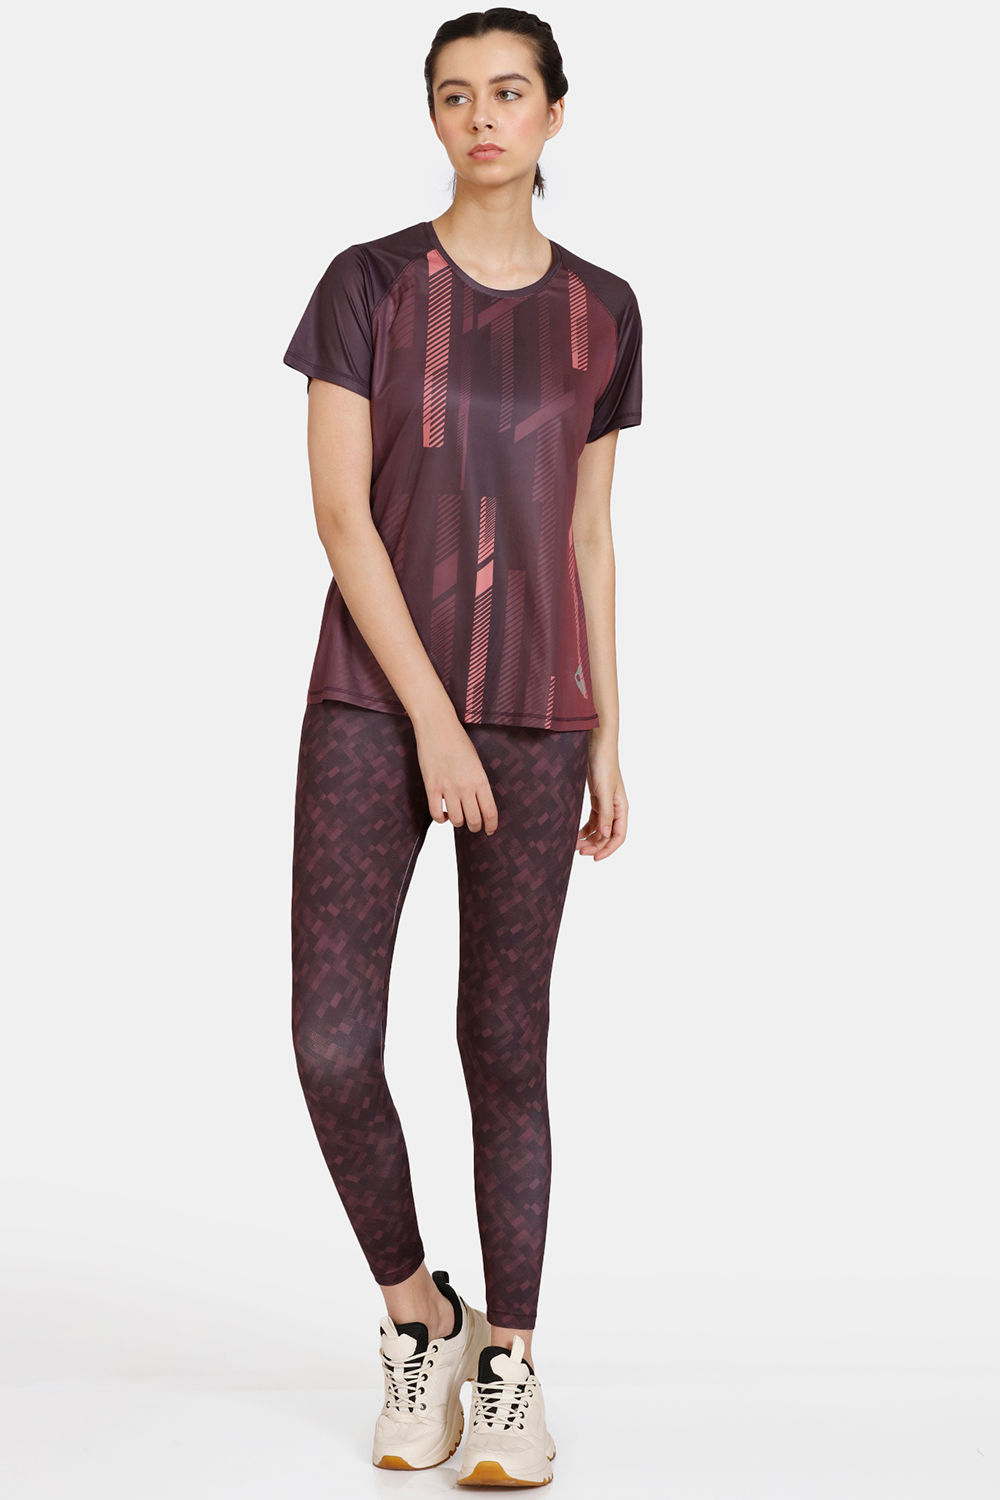 Buy Zelocity Relaxed Fit Quick Dry Top With High impact Quick Dry Leggings - Coral Quartz